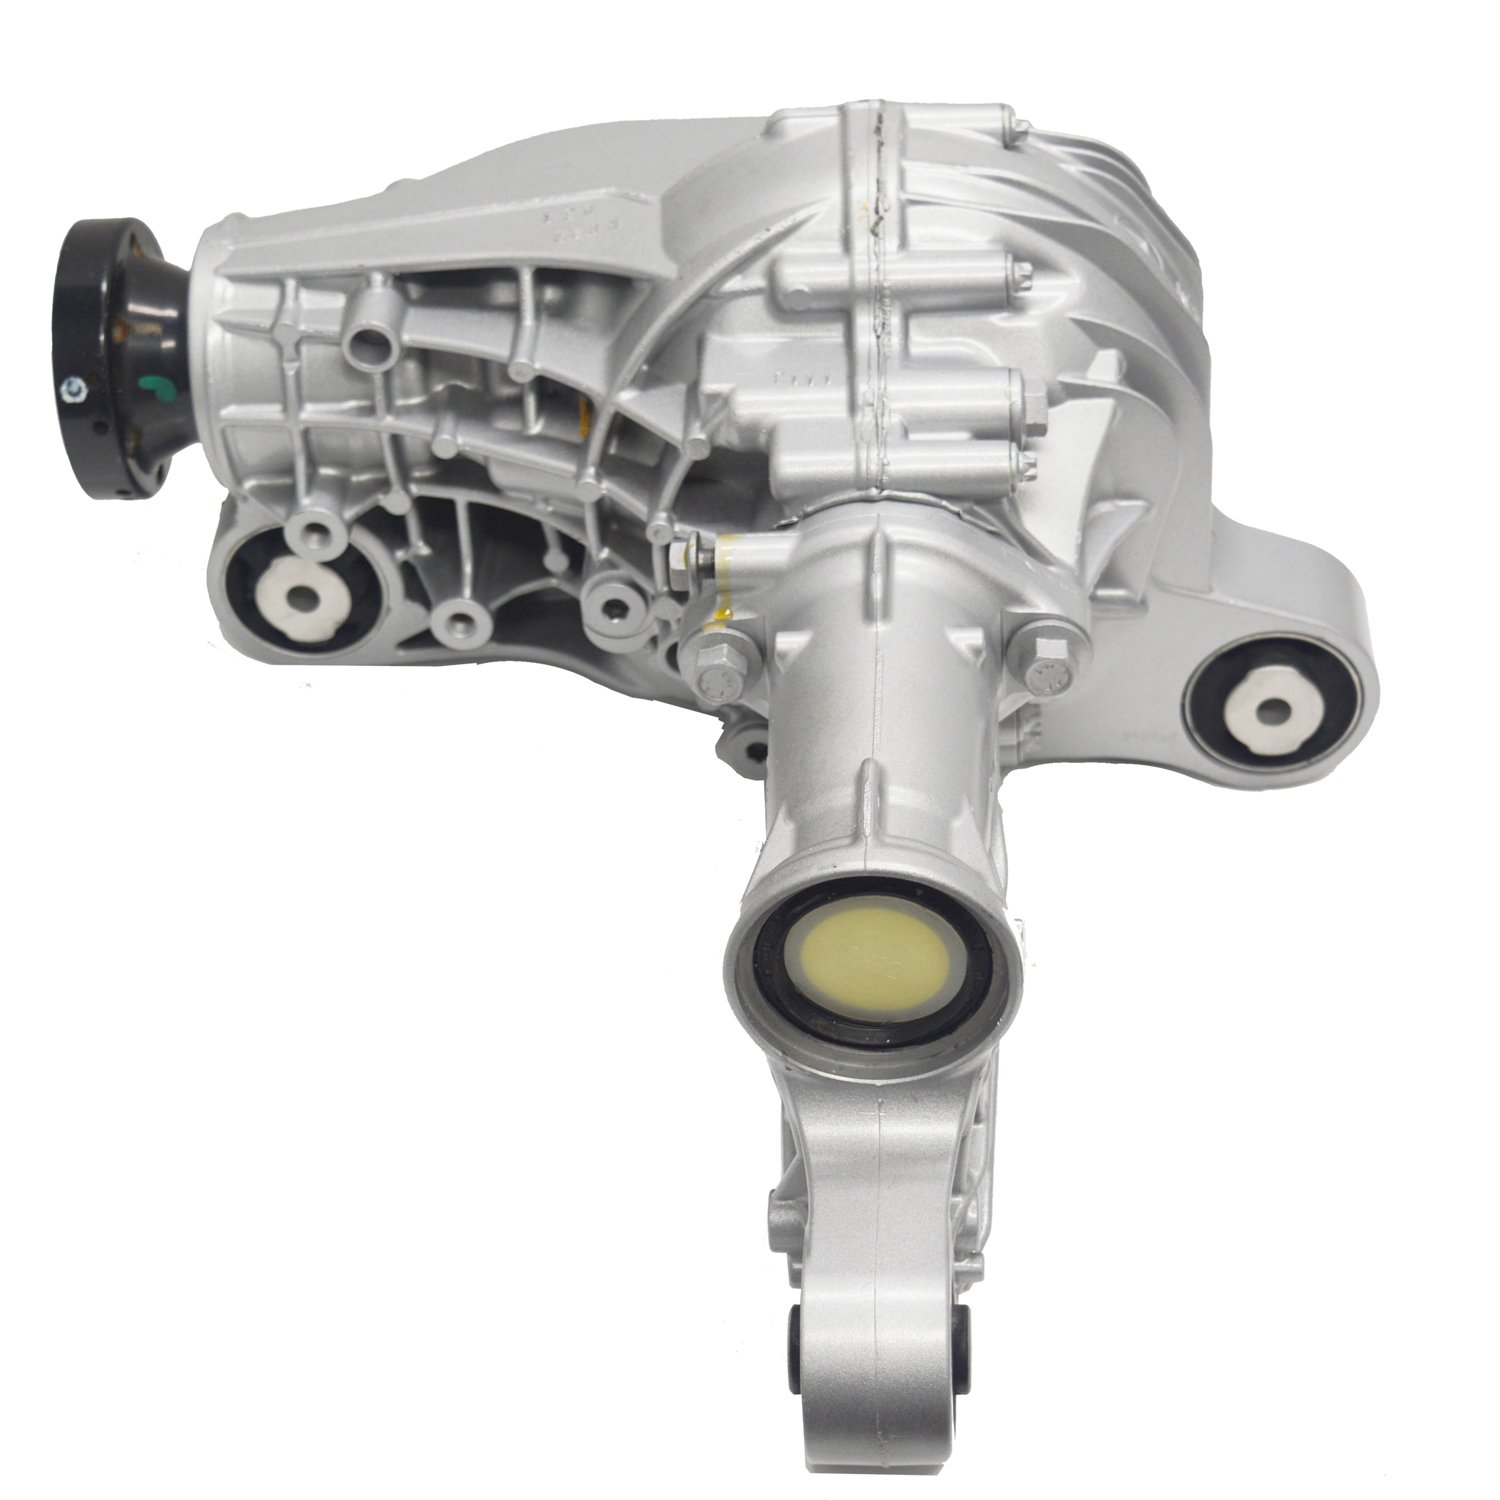 Remanufactured Axle Assy for Mercedes GL320, GL450, GL550, ML500, ML550, Front diff 3.70